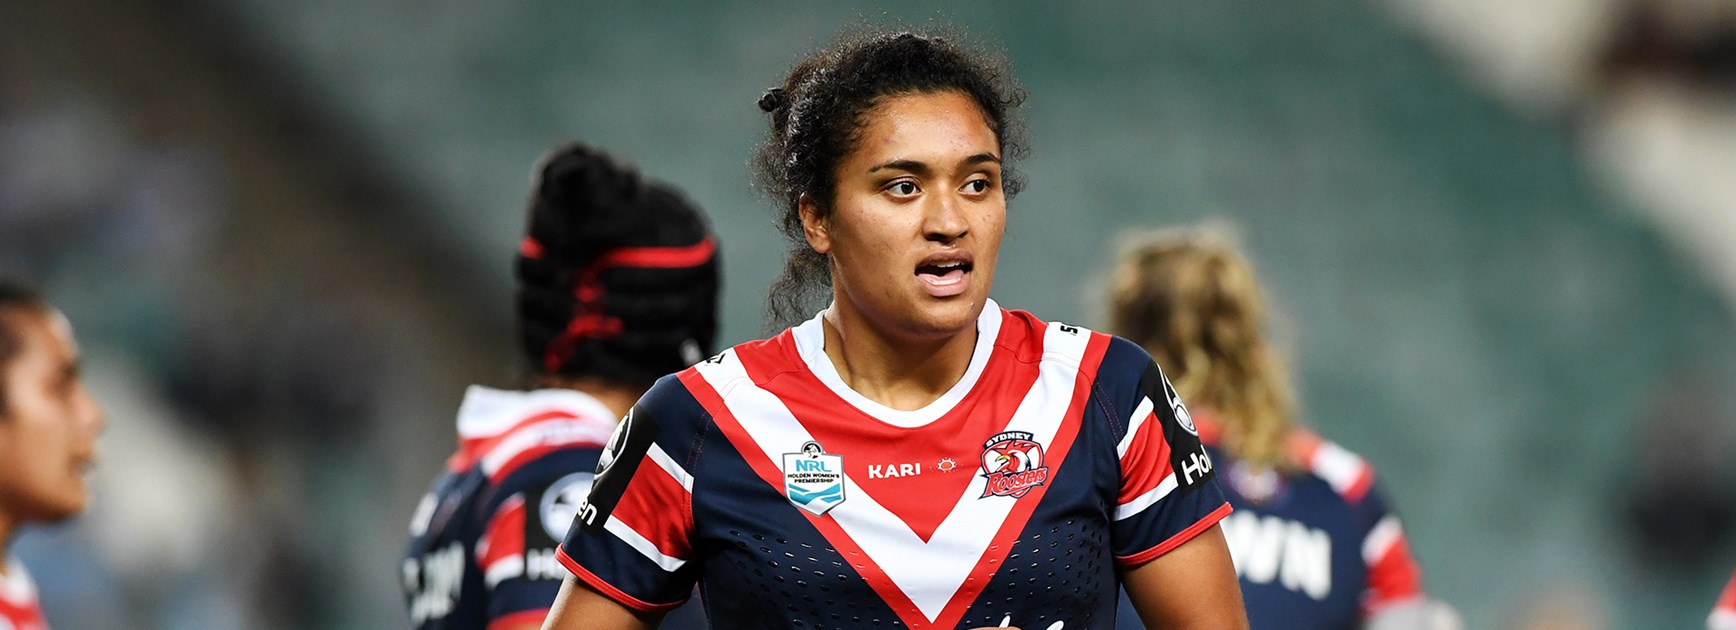 NRL Holden Women’s Premiership to include standalone matches in 2019